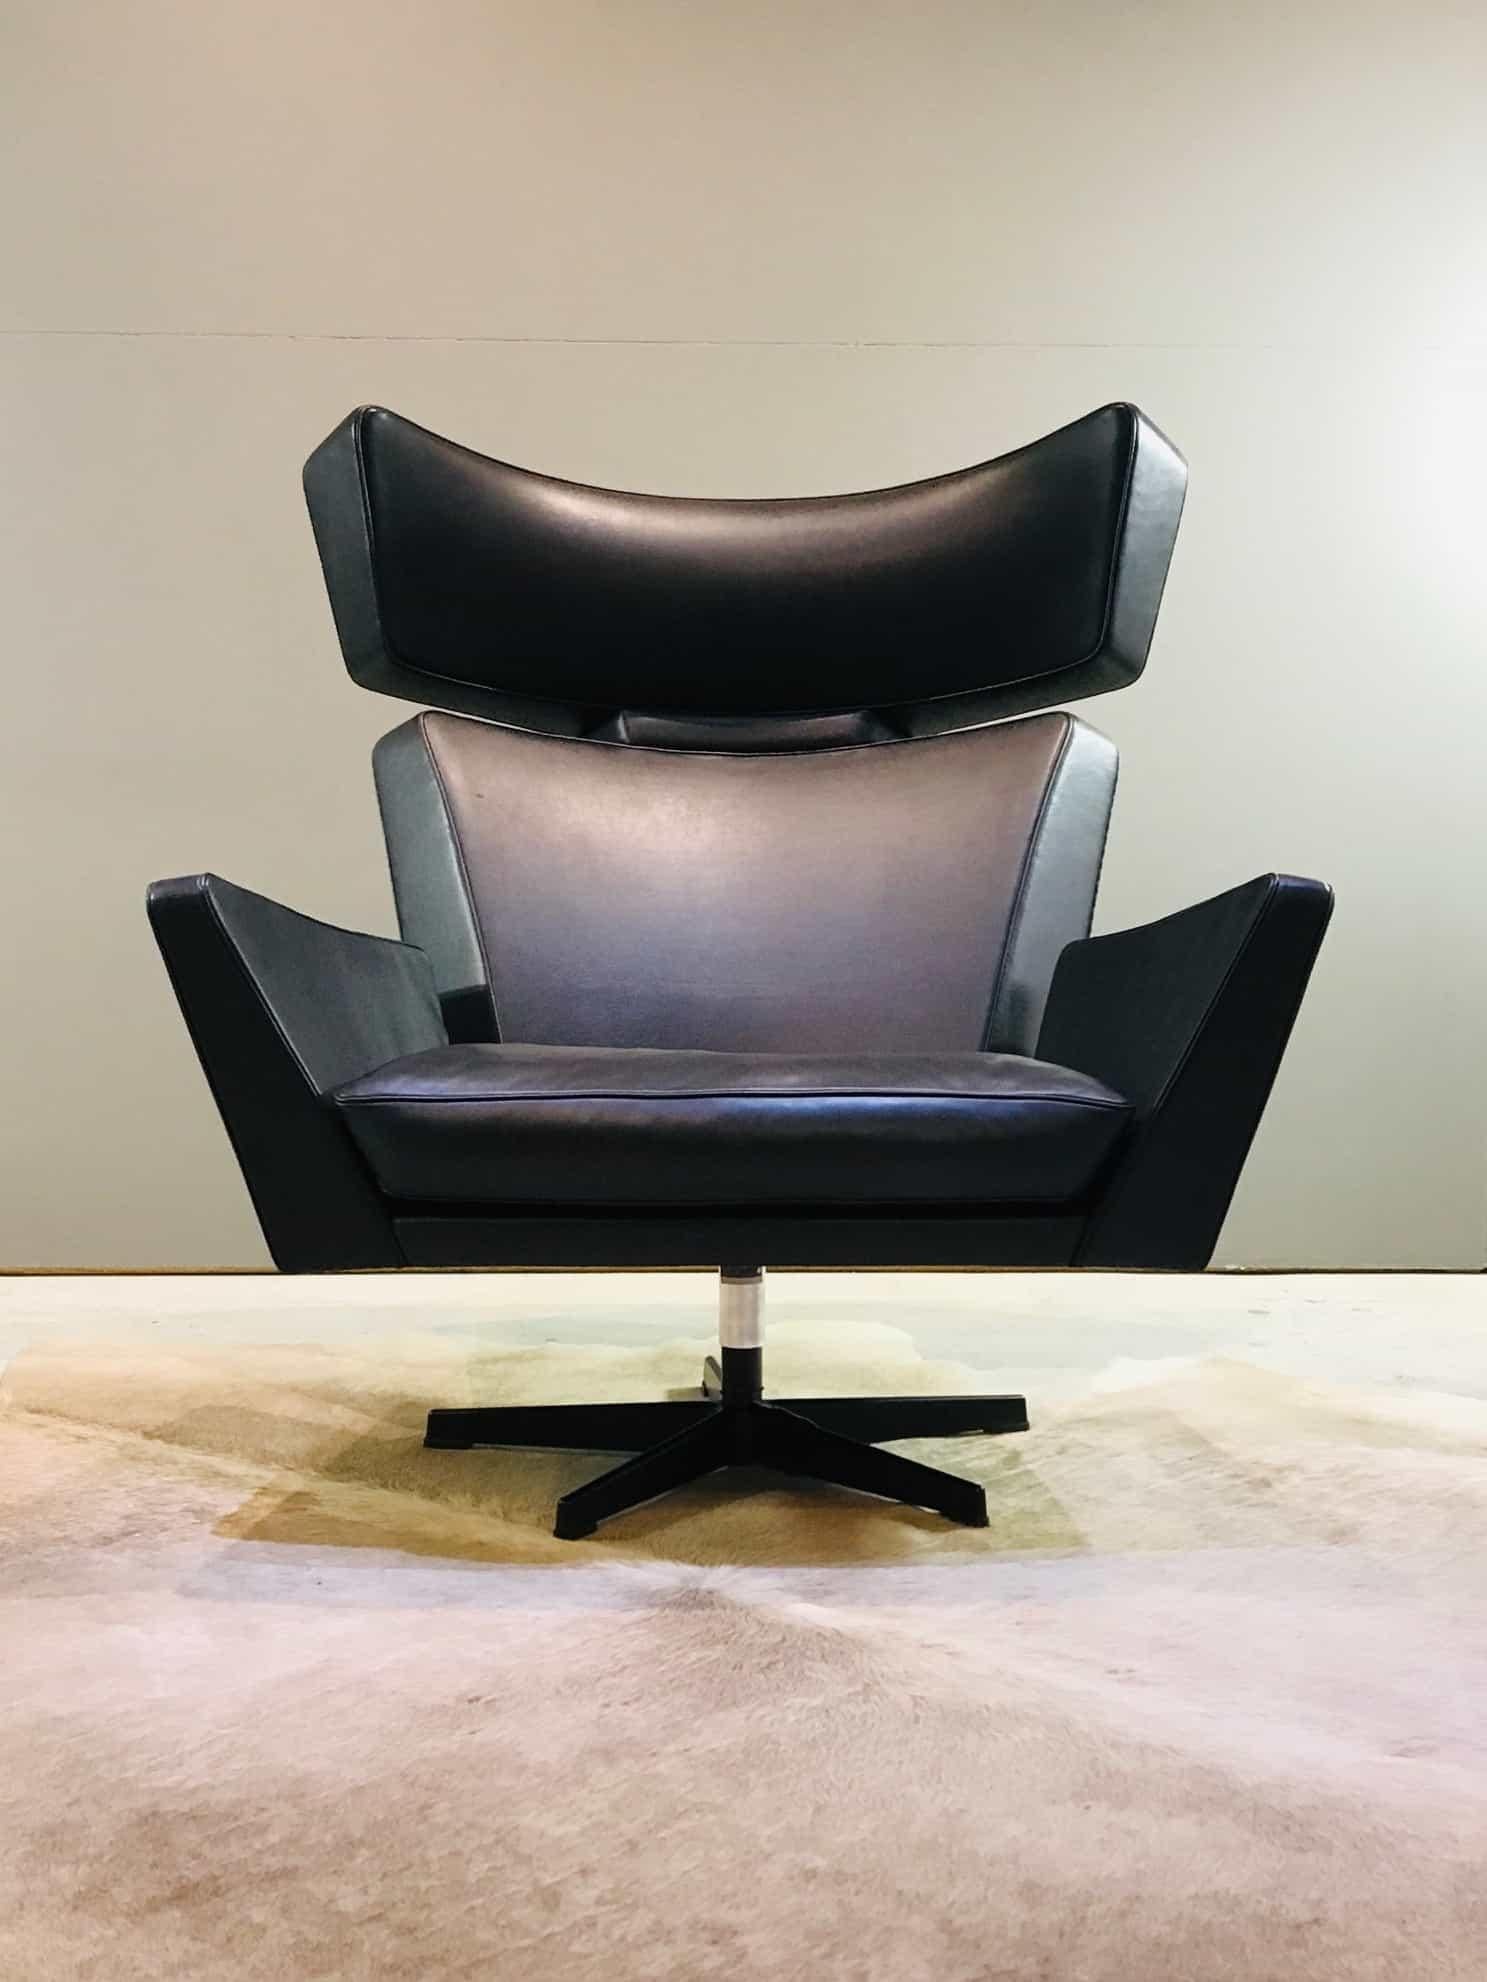 Midcentury Black Leather Lounge Chair by Arne Jacobsen Oksen, Ox Chair For Sale 5